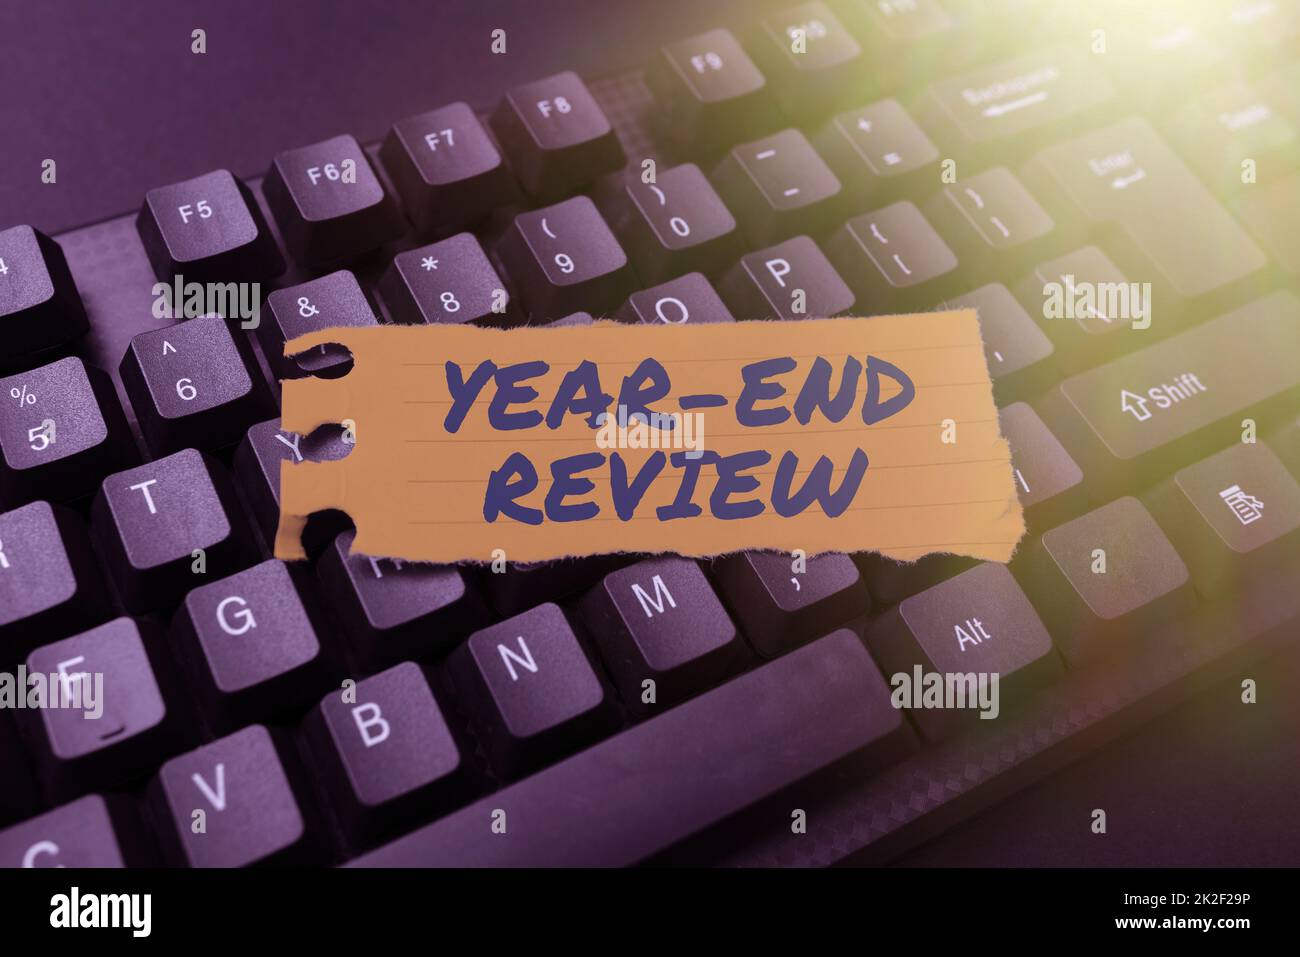 Text showing inspiration Year end Review. Internet Concept Year end Review Typing New Edition Of Informational Ebook, Creating Fresh Website Content Stock Photo